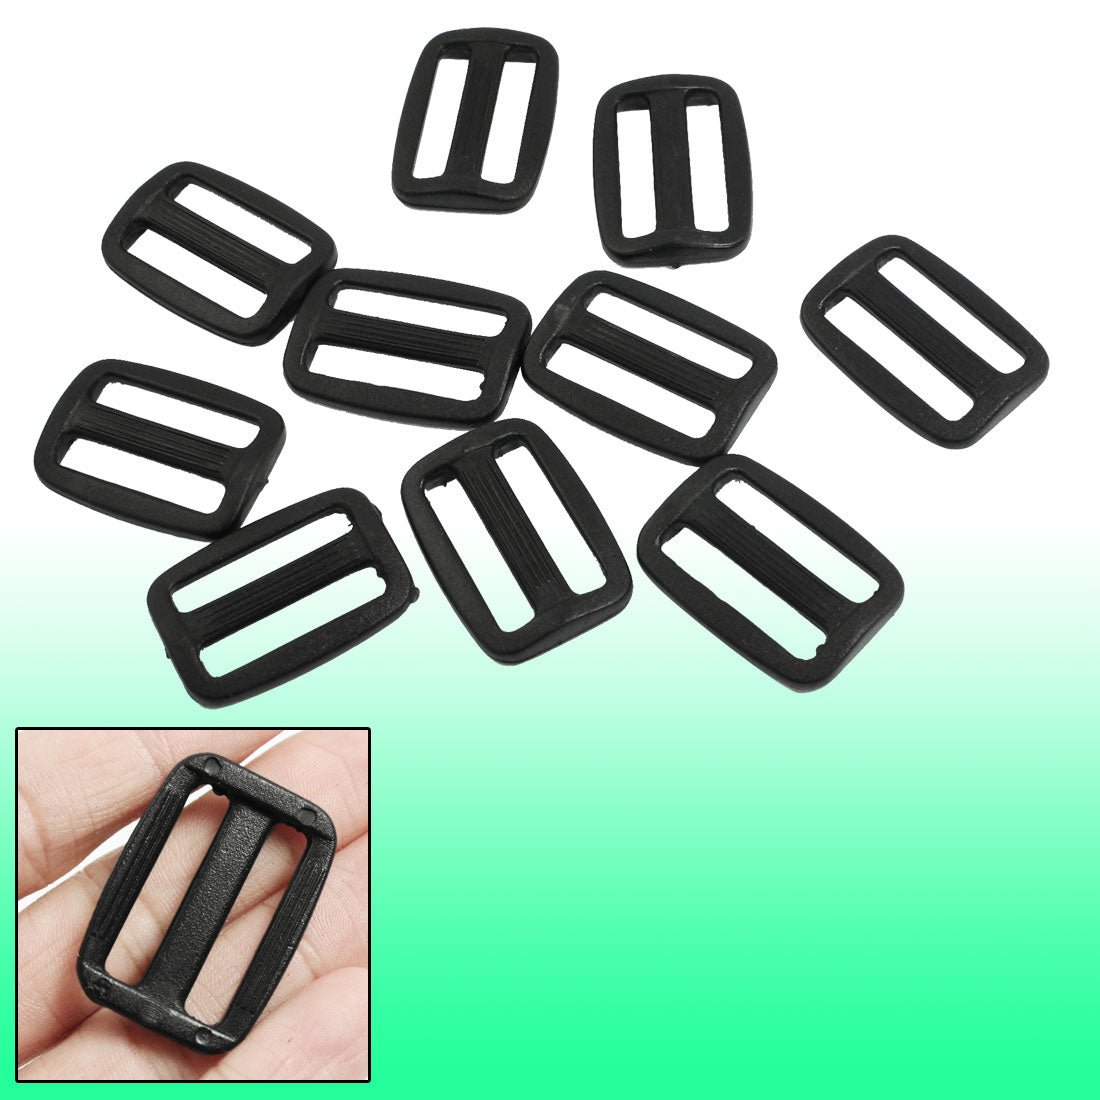 uxcell Uxcell Luggage Bag Replacement Plastic 1" Side Rectangle Buckle 10 Pcs